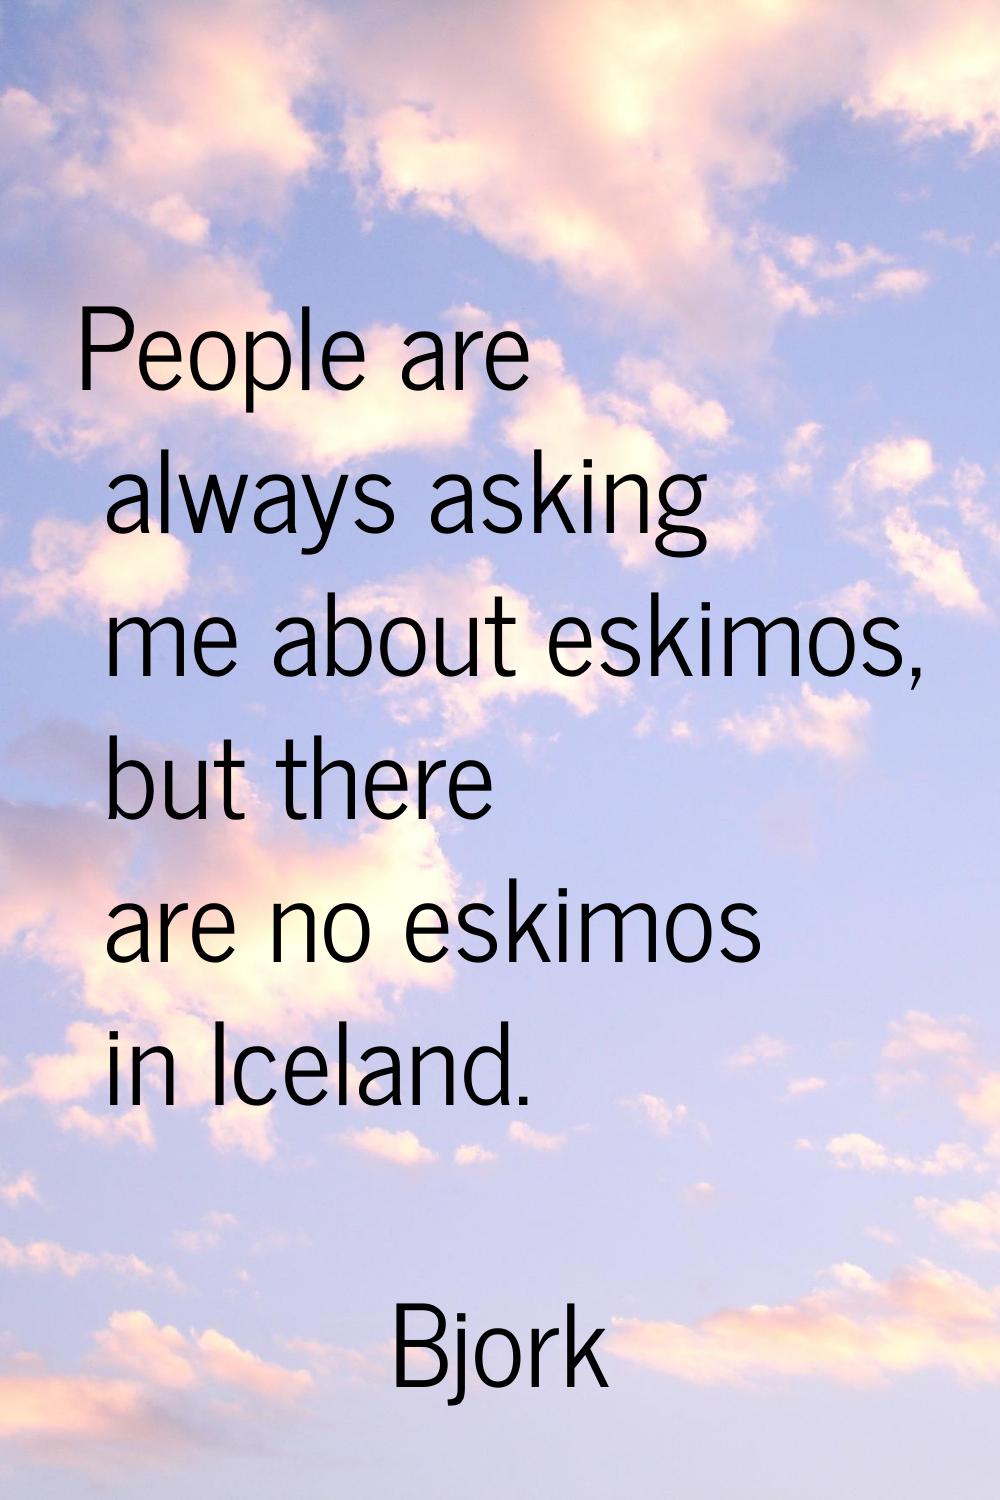 People are always asking me about eskimos, but there are no eskimos in Iceland.